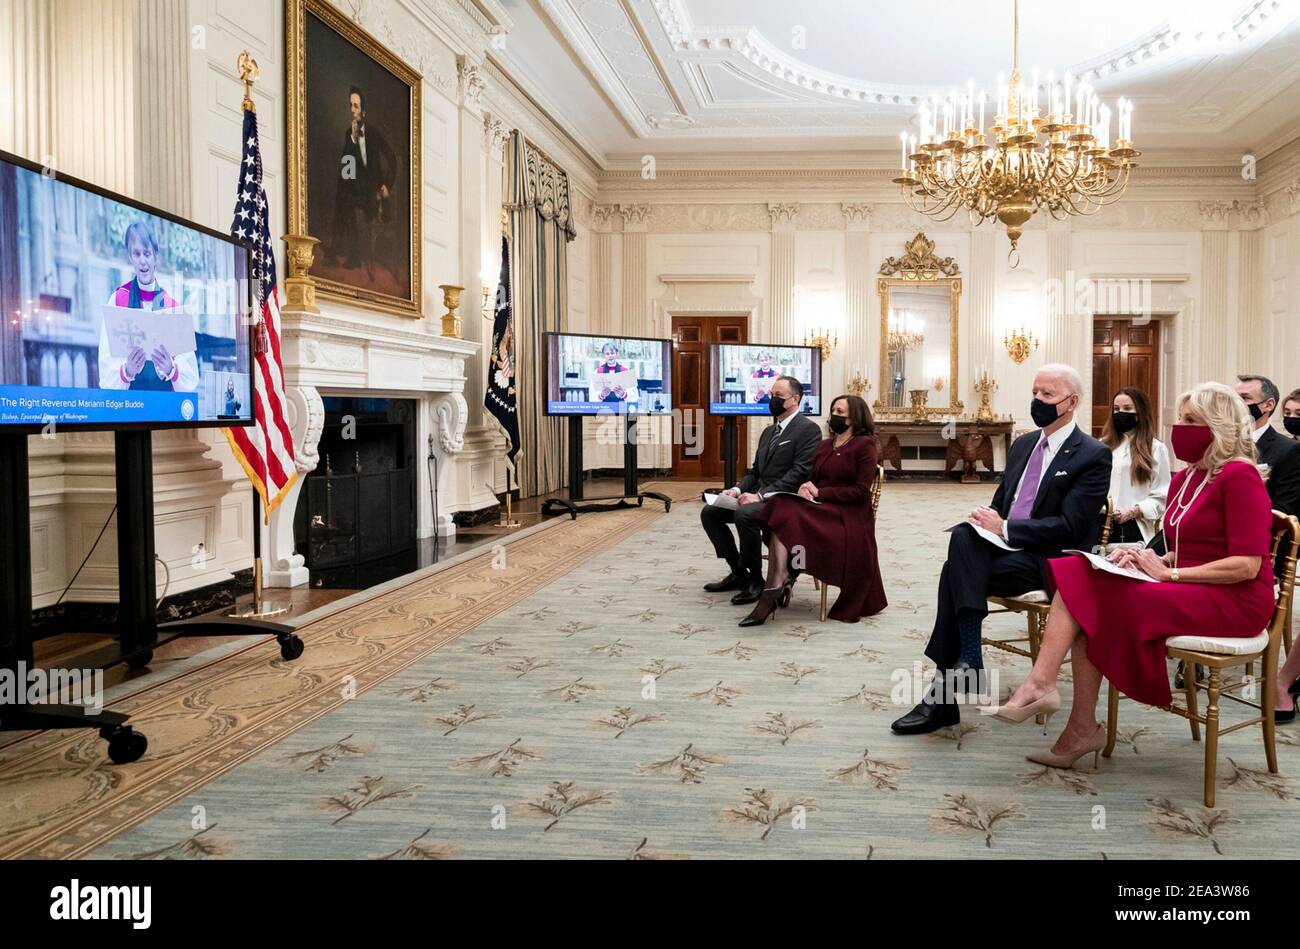 U.S President Joe Biden and First Lady Dr. Jill Biden, joined by Vice President Kamala Harris, Doug Emhoff and members of the Biden family, attend a virtual presidential inaugural prayer service in the State Dining Room of the White House January 21, 2021 in Washington, D.C. Stock Photo